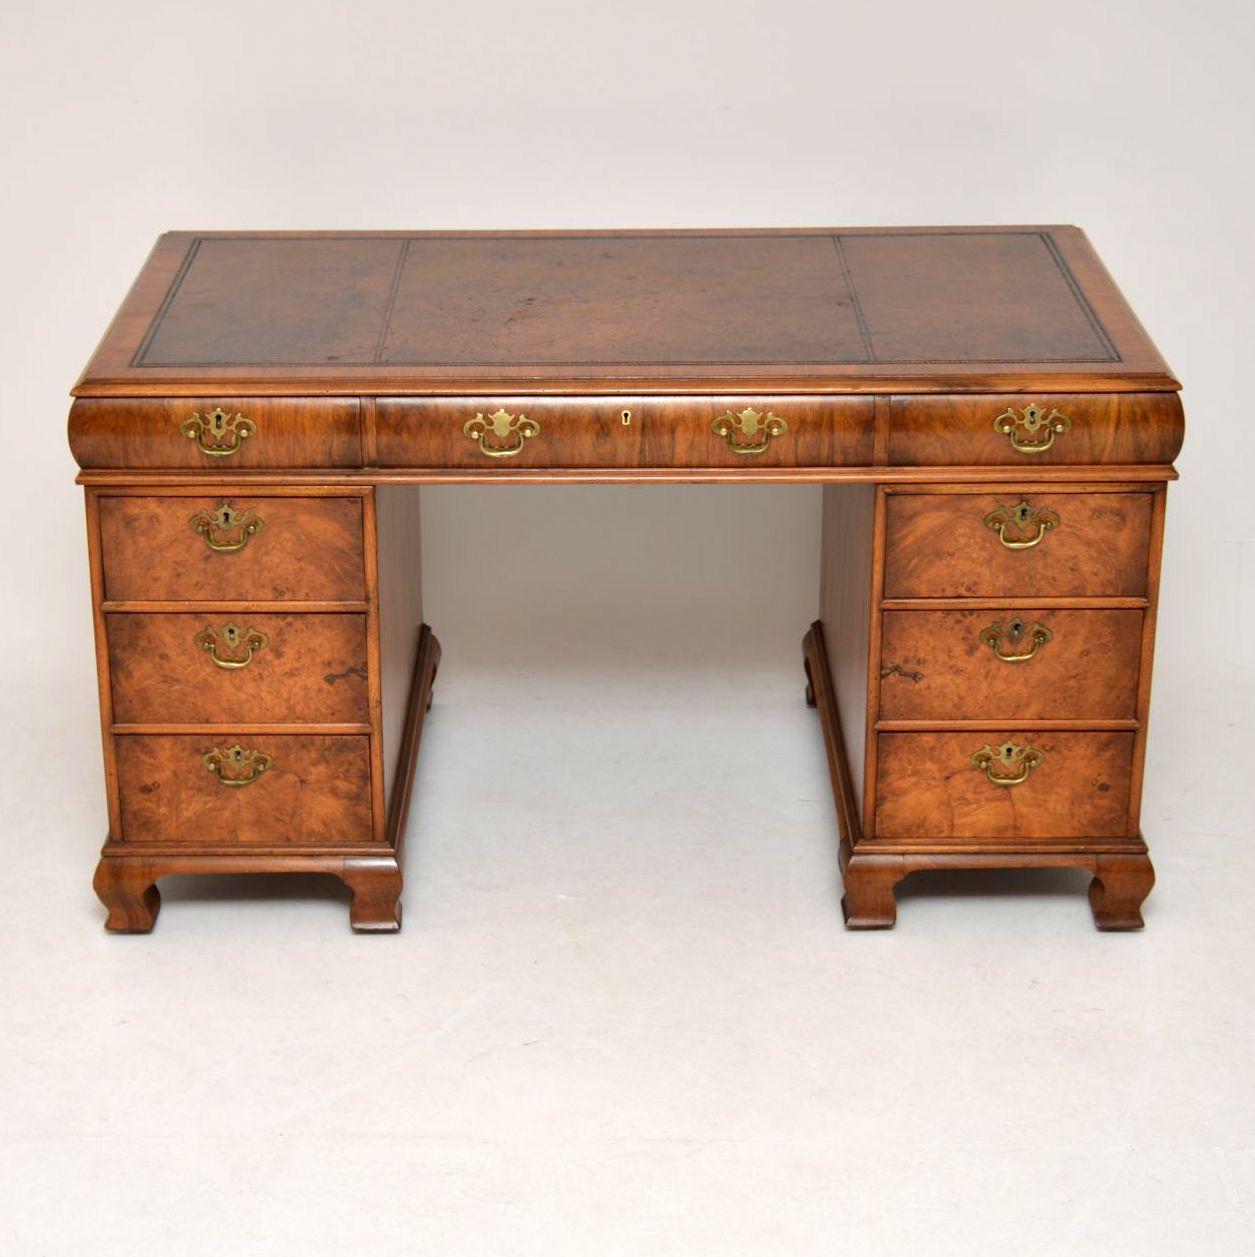 This is a stunning walnut pedestal desk in good original condition and dating to circa 1910s-1920s period. The writing surface is the original tooled hide and is quite distressed, although still useable and full of character. We thought about